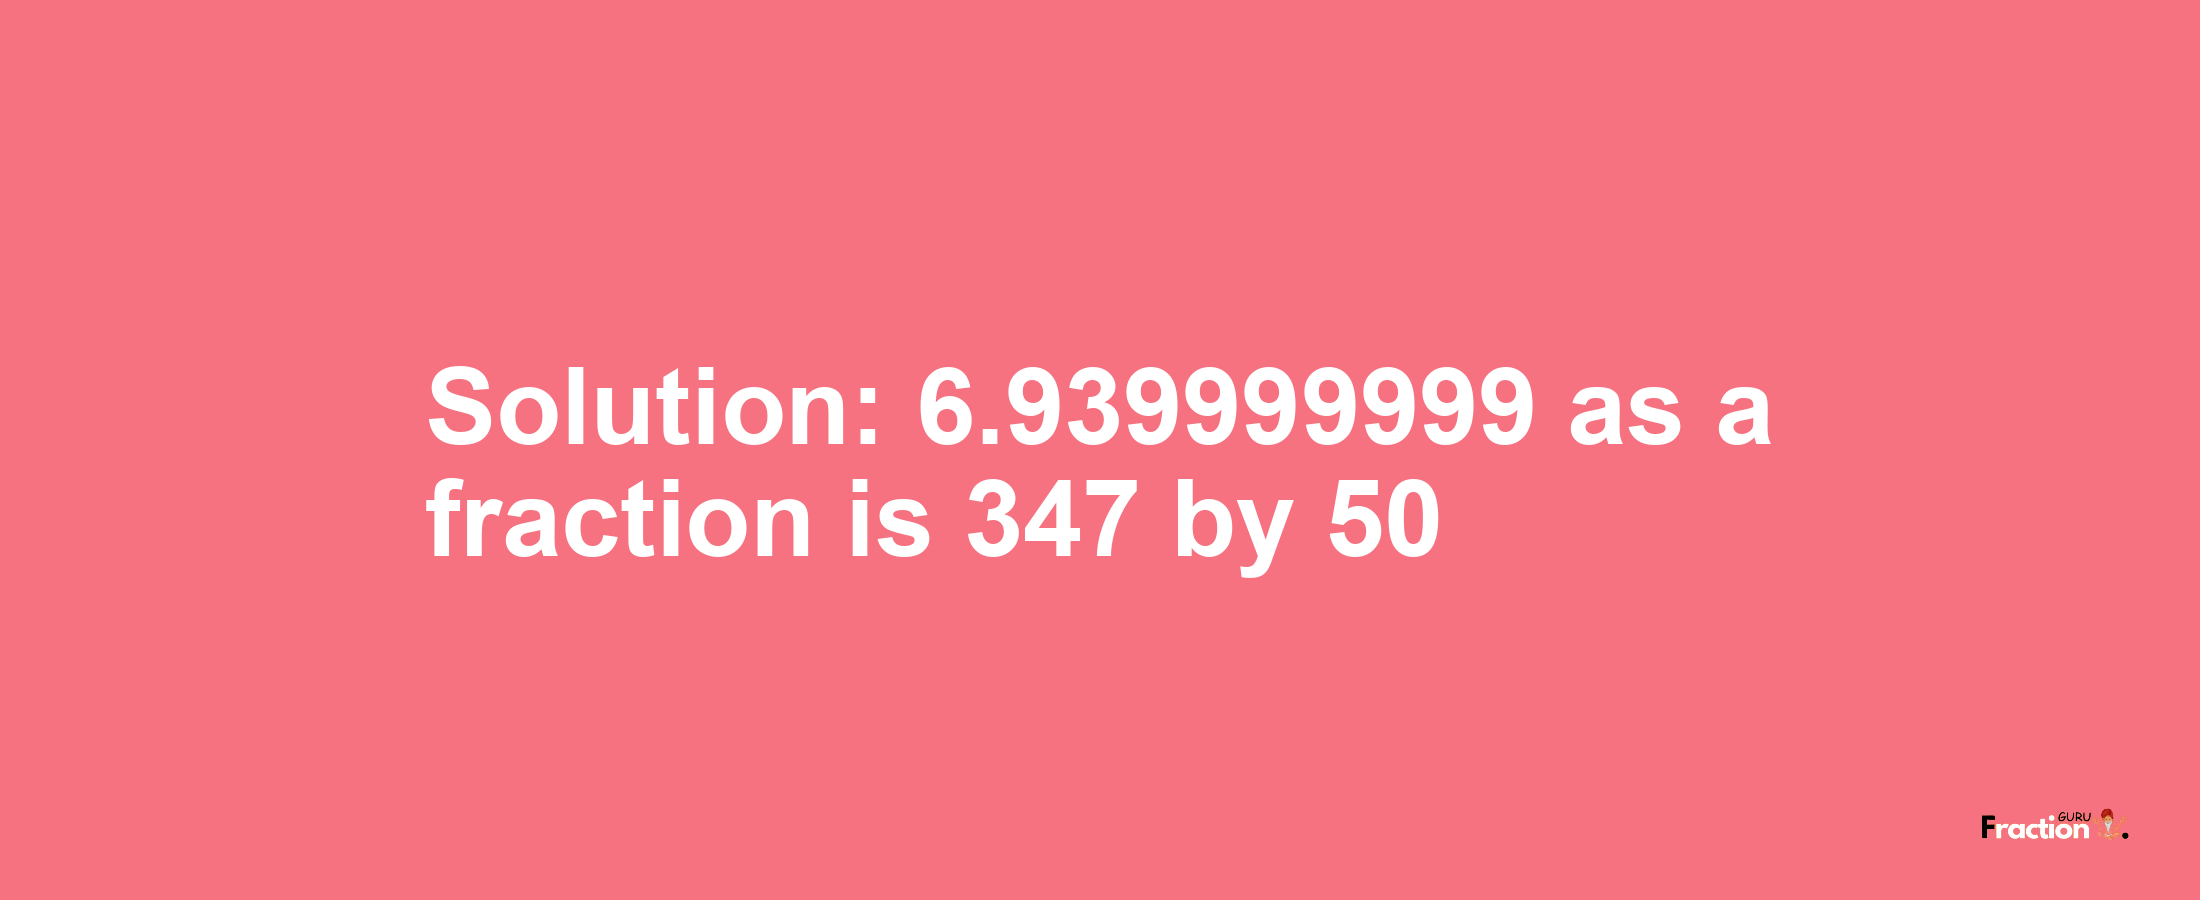 Solution:6.939999999 as a fraction is 347/50